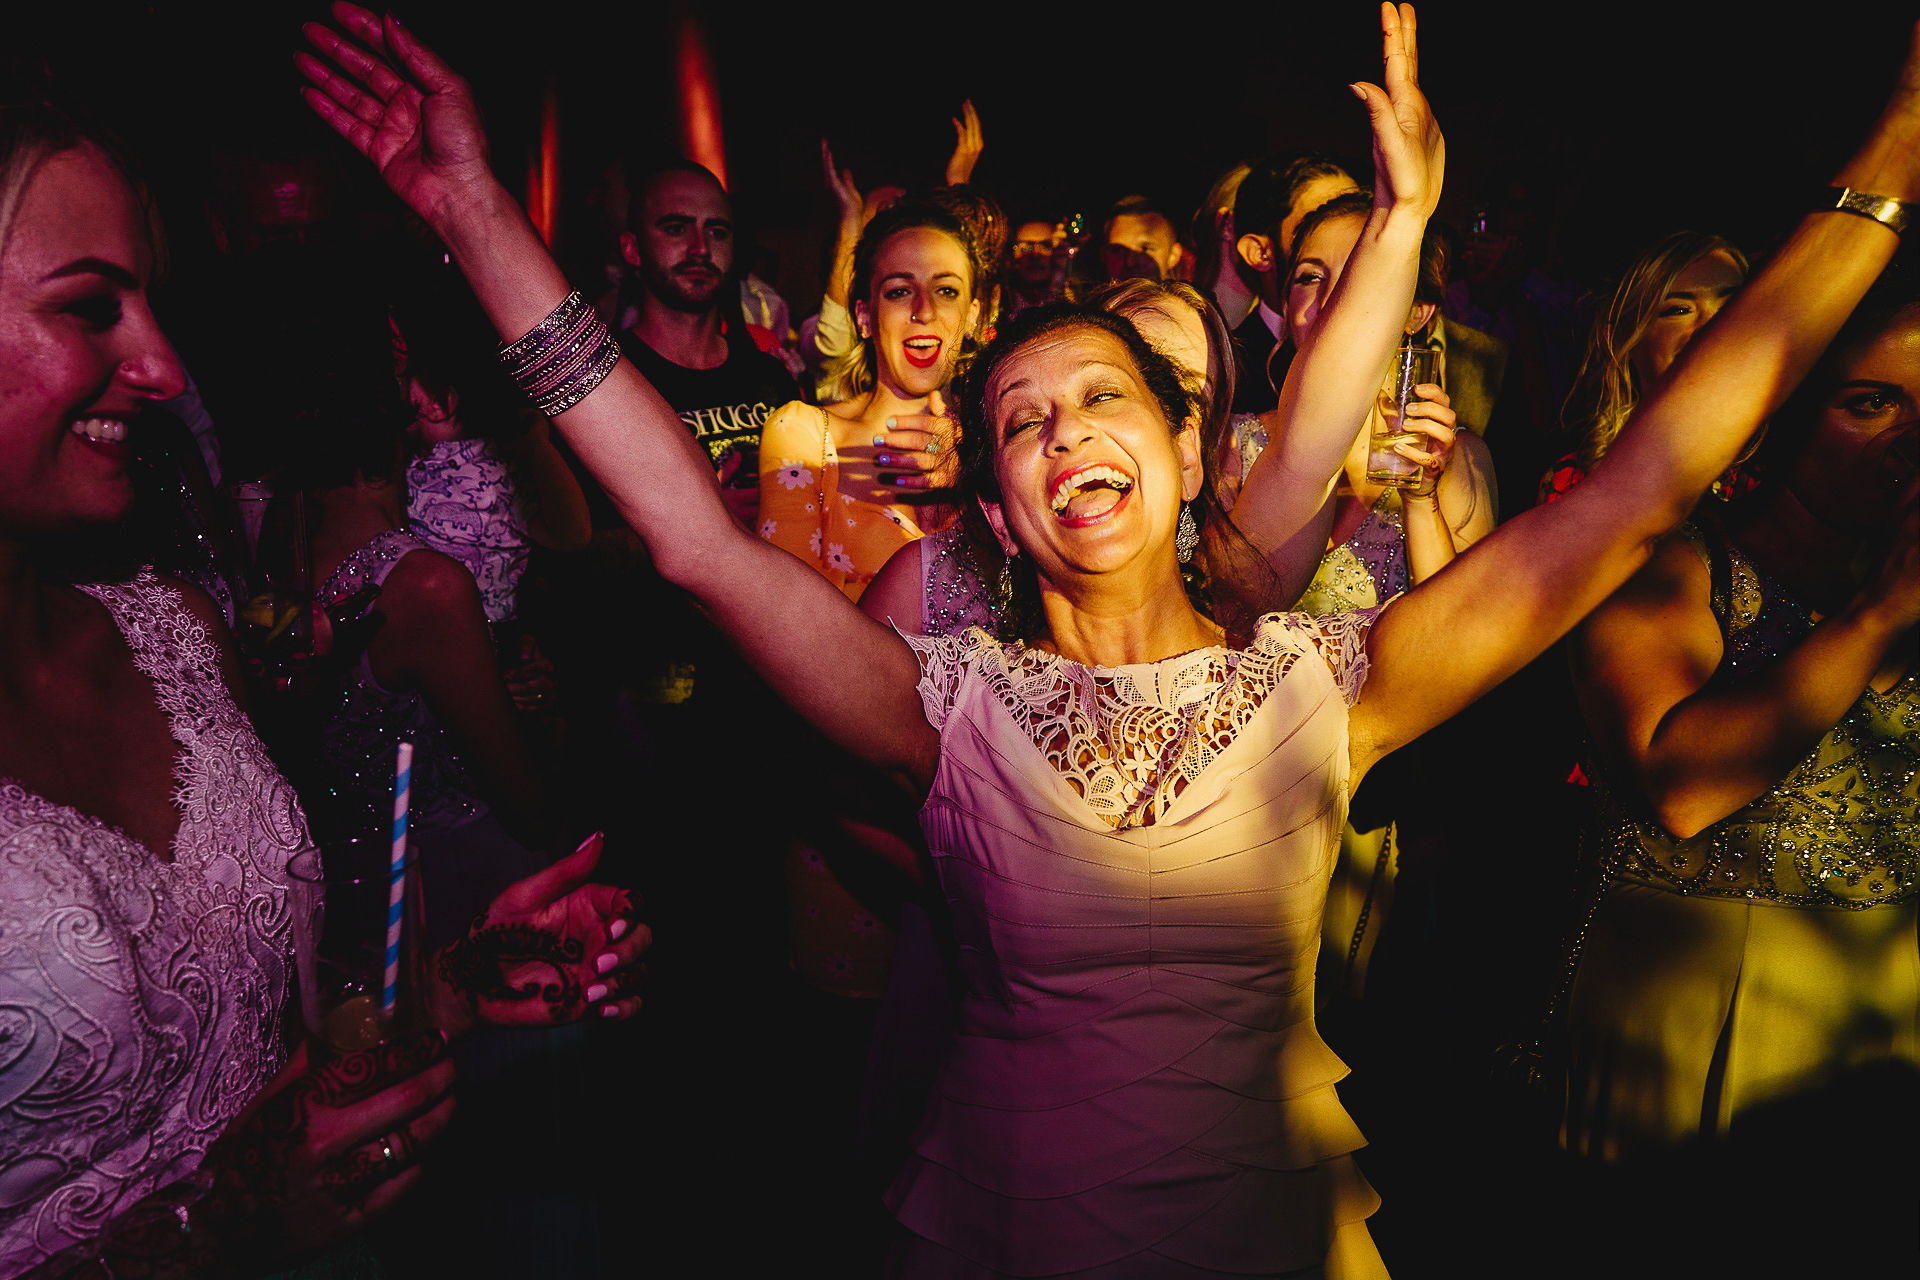 Mother of the groom throwing her arms in the air on the dancefloor